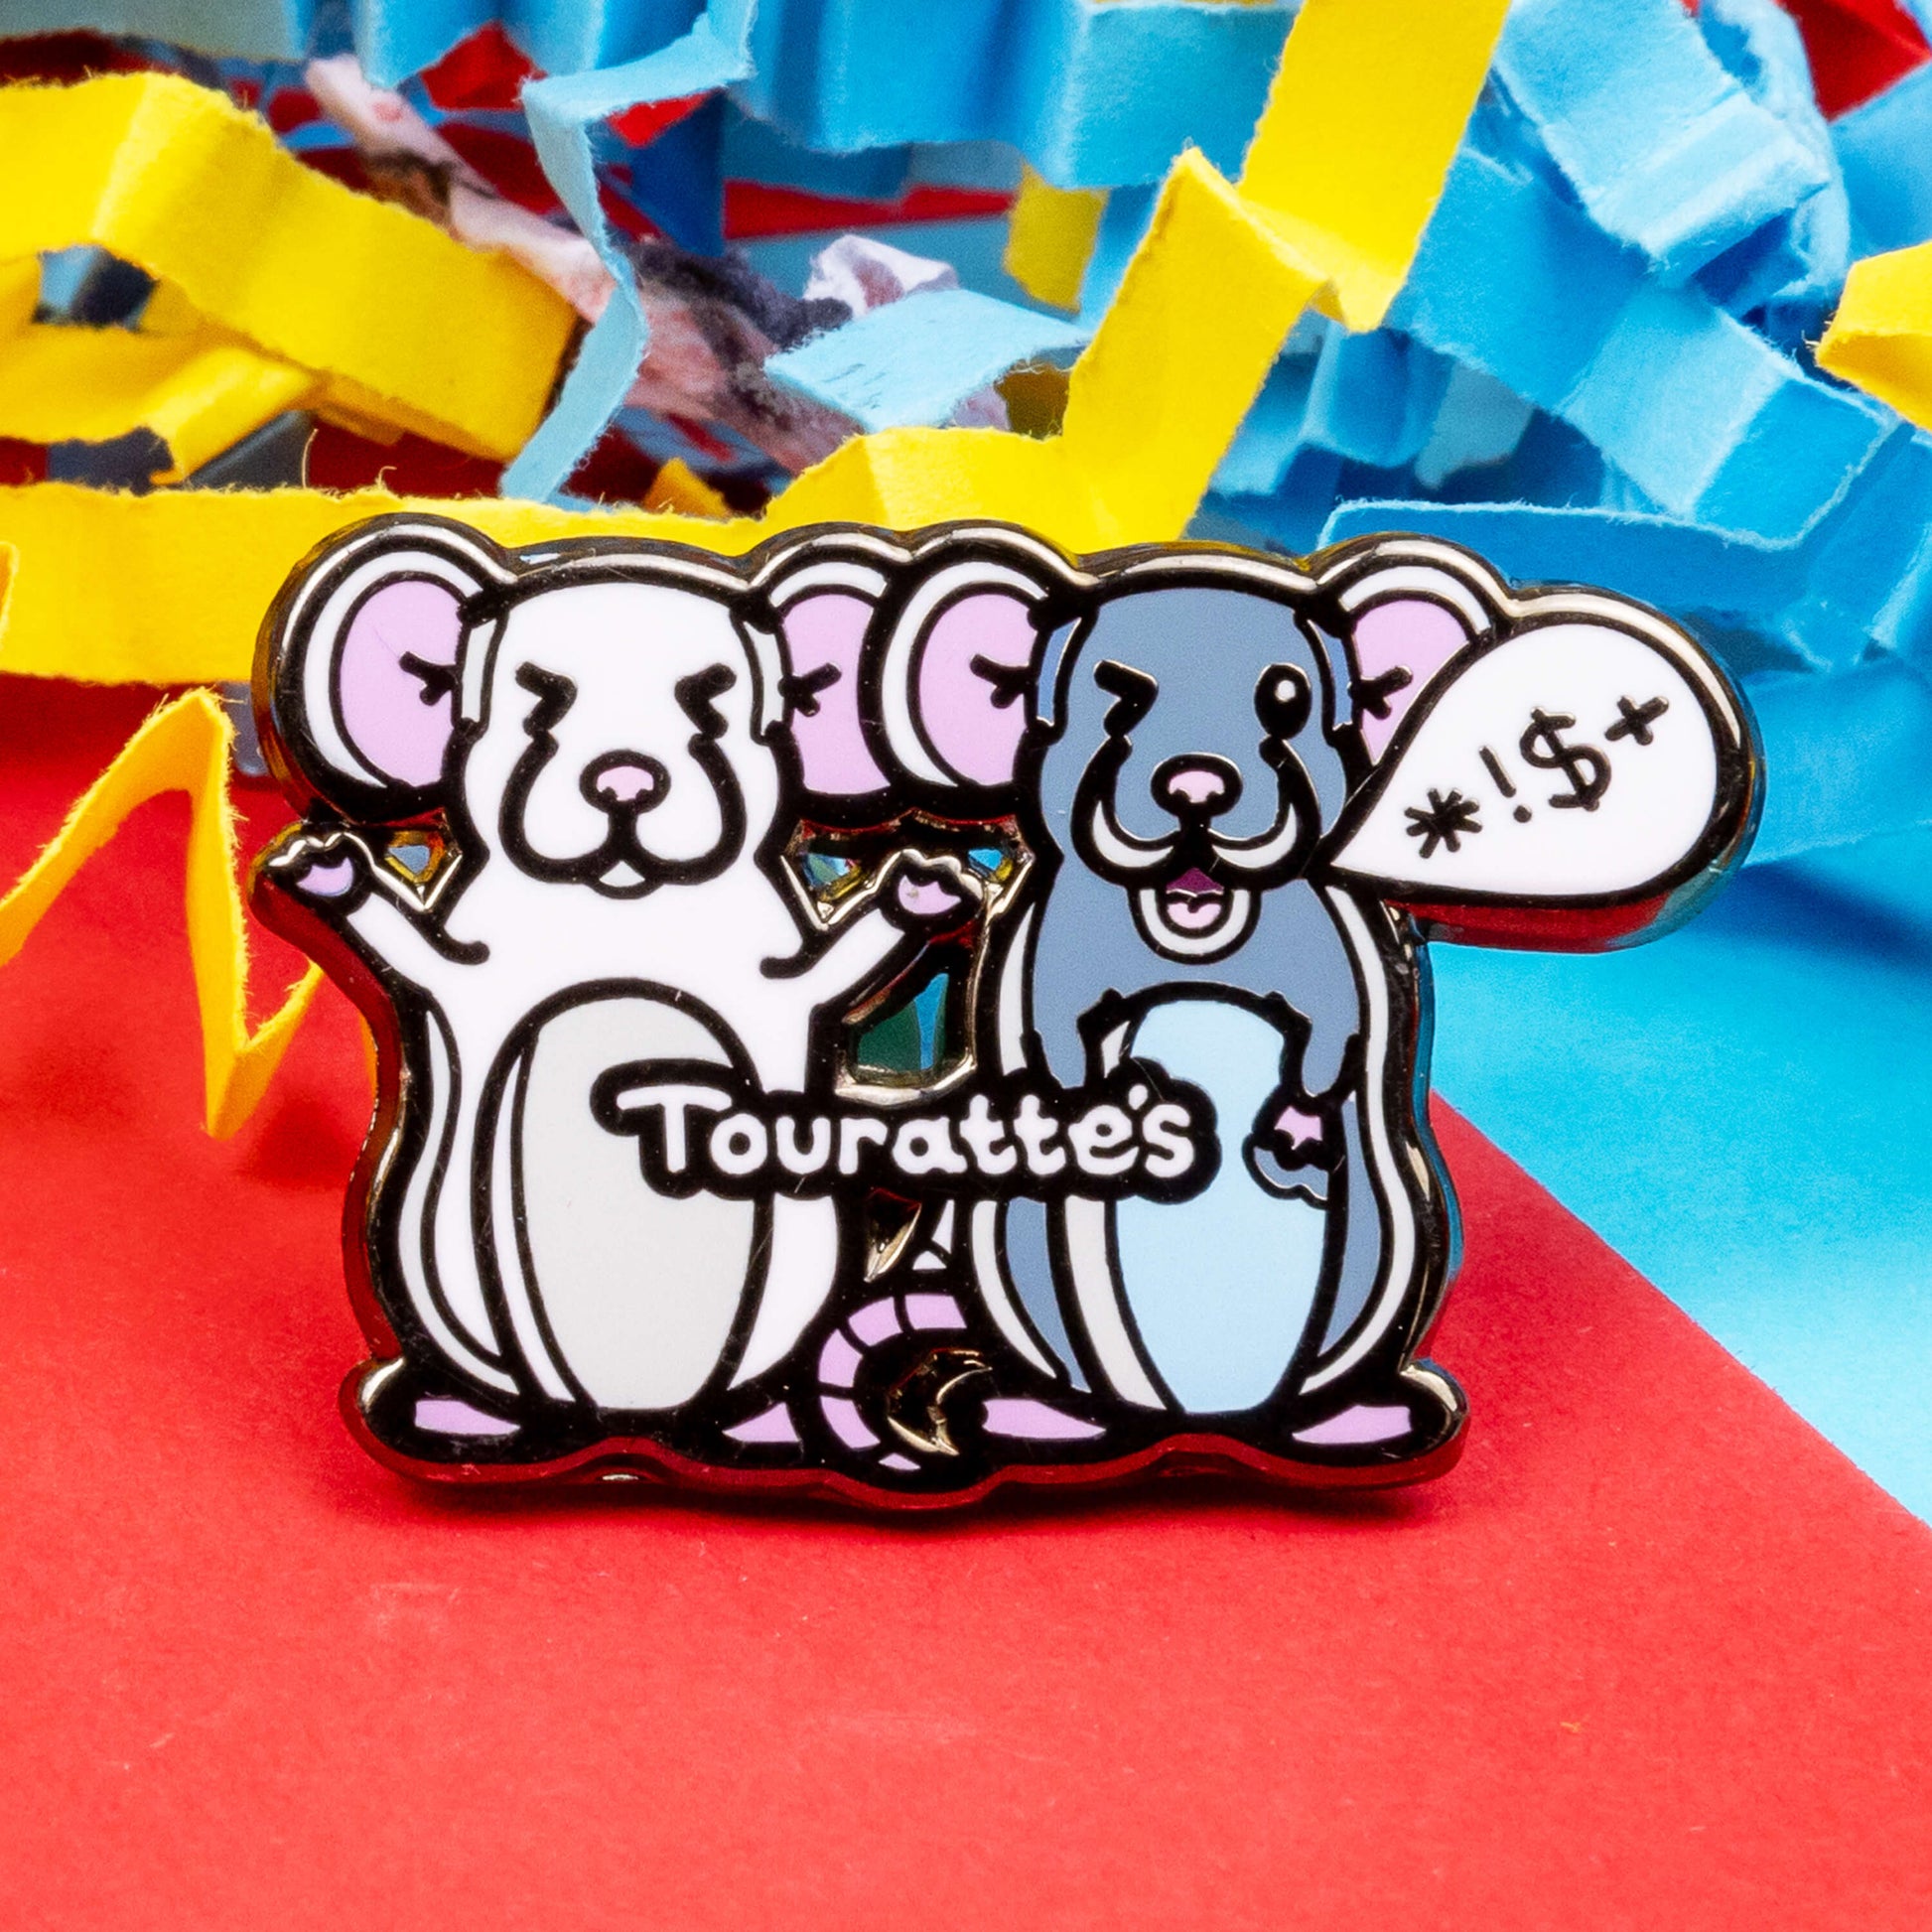 The Touratte's Rat Enamel Pin - Tourette's Syndrome on a red, blue and yellow paper background. The enamel pin is of two rats with pink ears and feet, the white rat on the left is raising its arms with its eyes closed and the grey rat on the right has a speech bubble with symbols in, across both rats reads 'touratte's'. The hand drawn design is raising awareness for tics and tourettes.